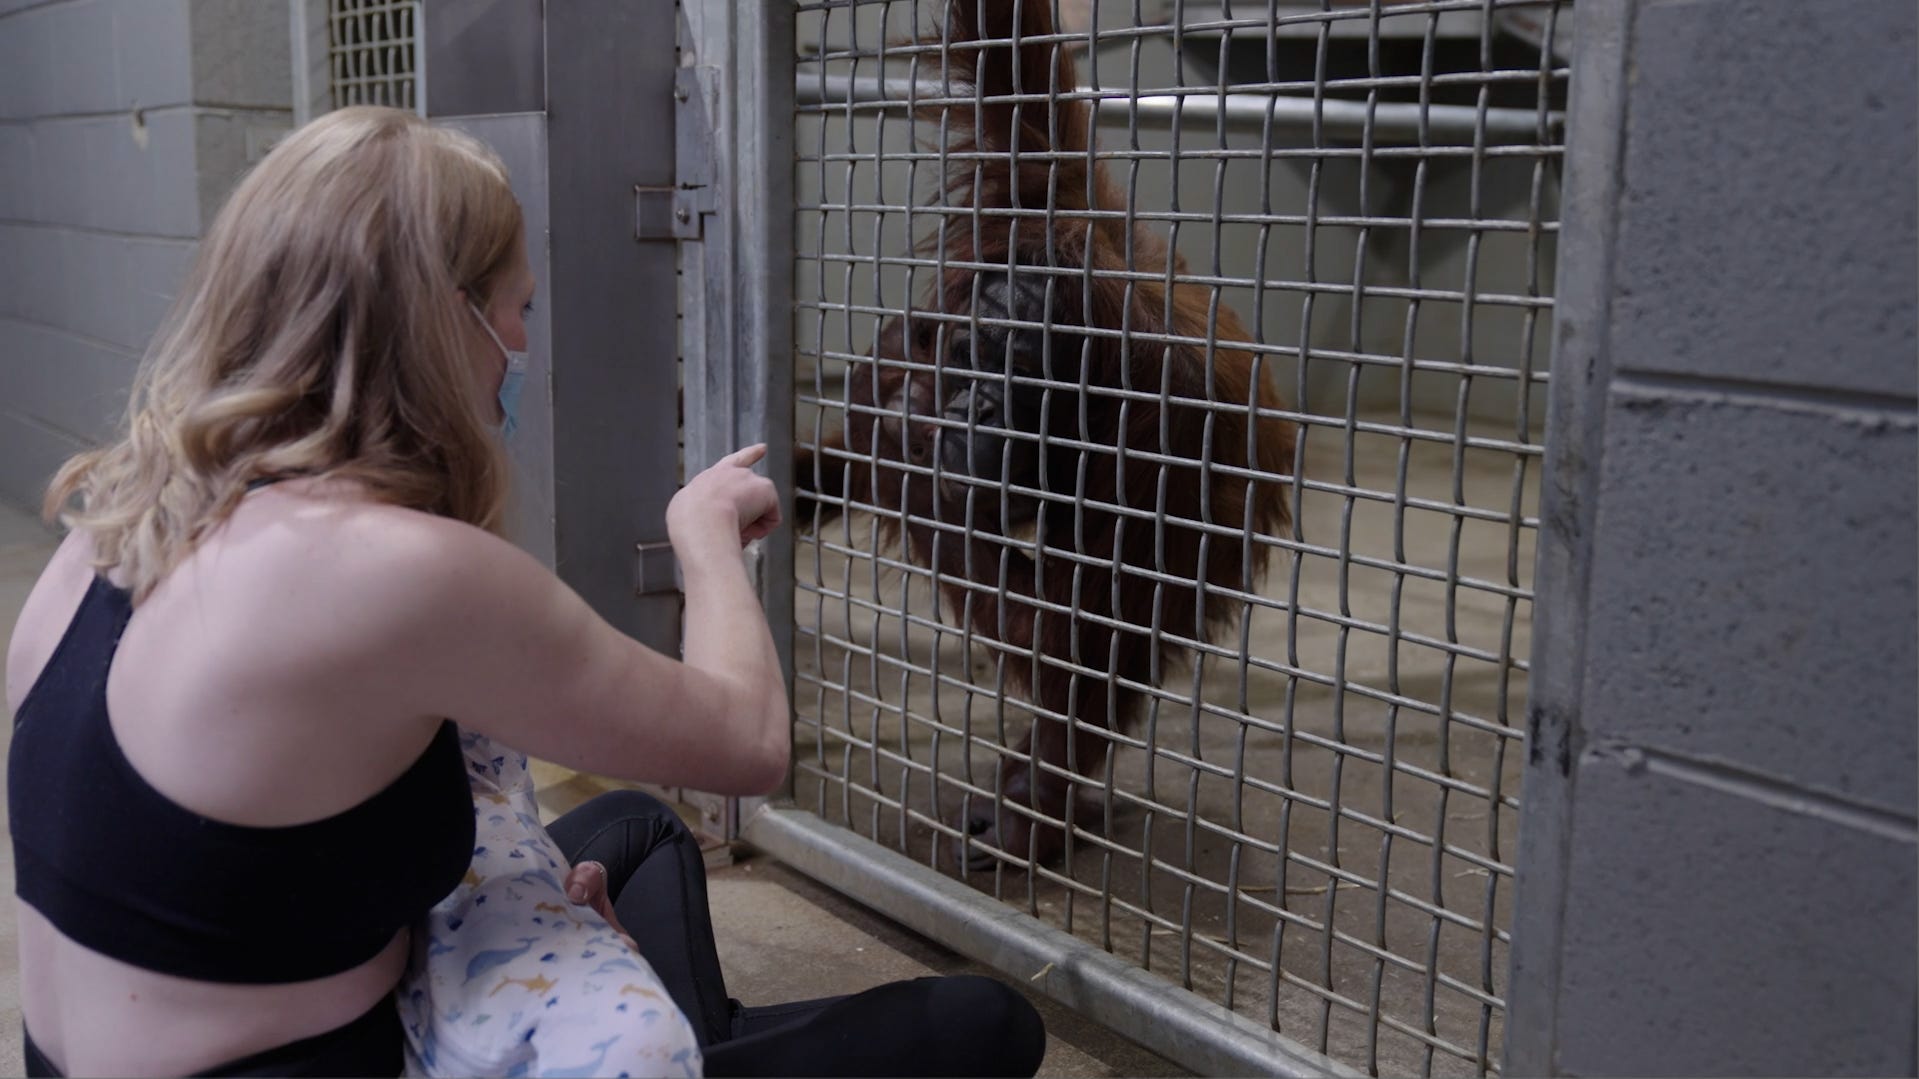 It takes a village: Orangutan mom learns how to nurse baby from breastfeeding zookeeper